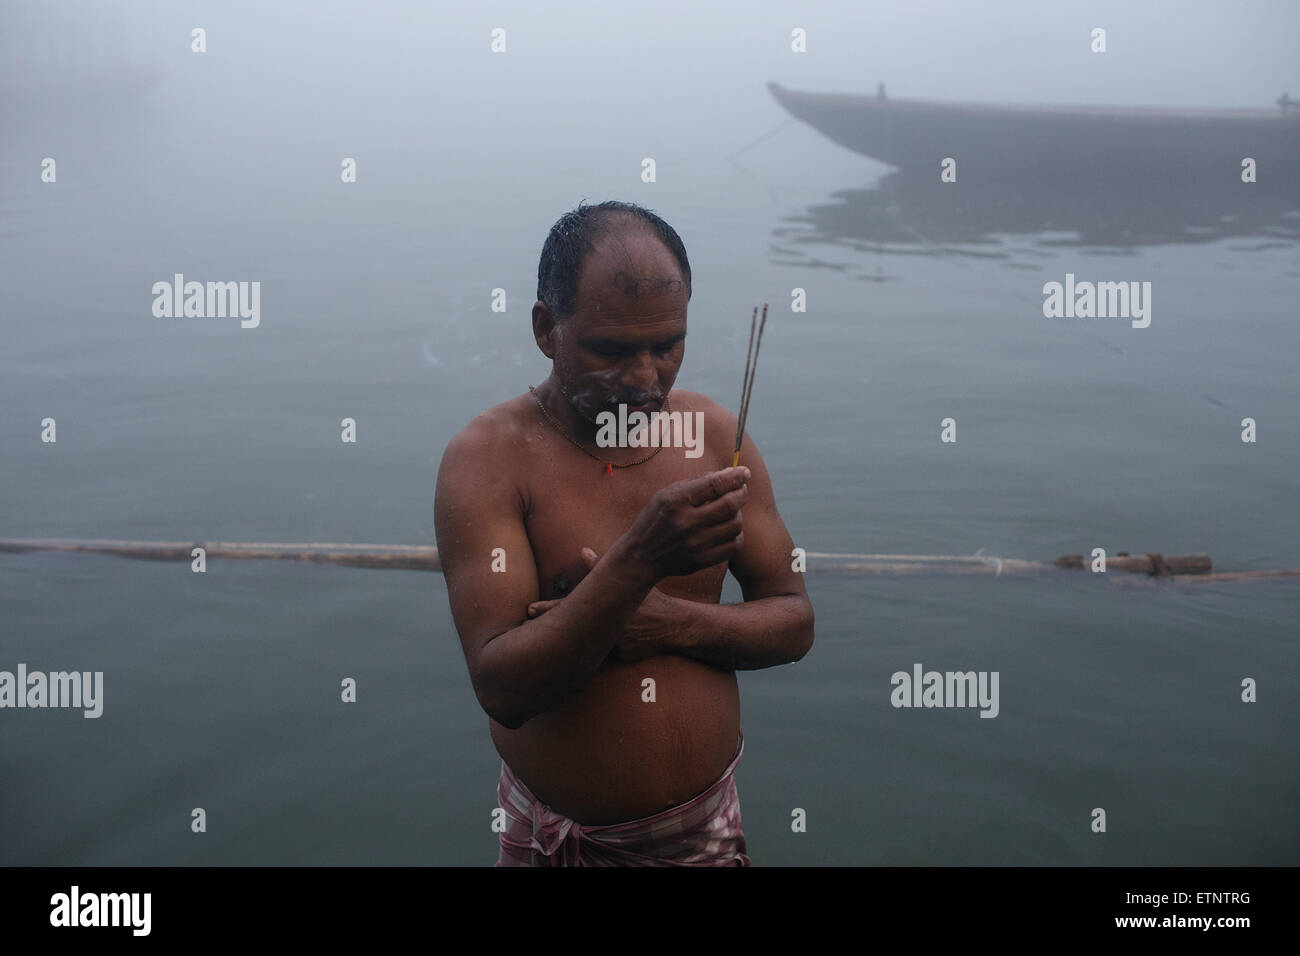 A man pilgrim praying in the misty morning in the Ganges river at the ghats in Varanasi, India Stock Photo